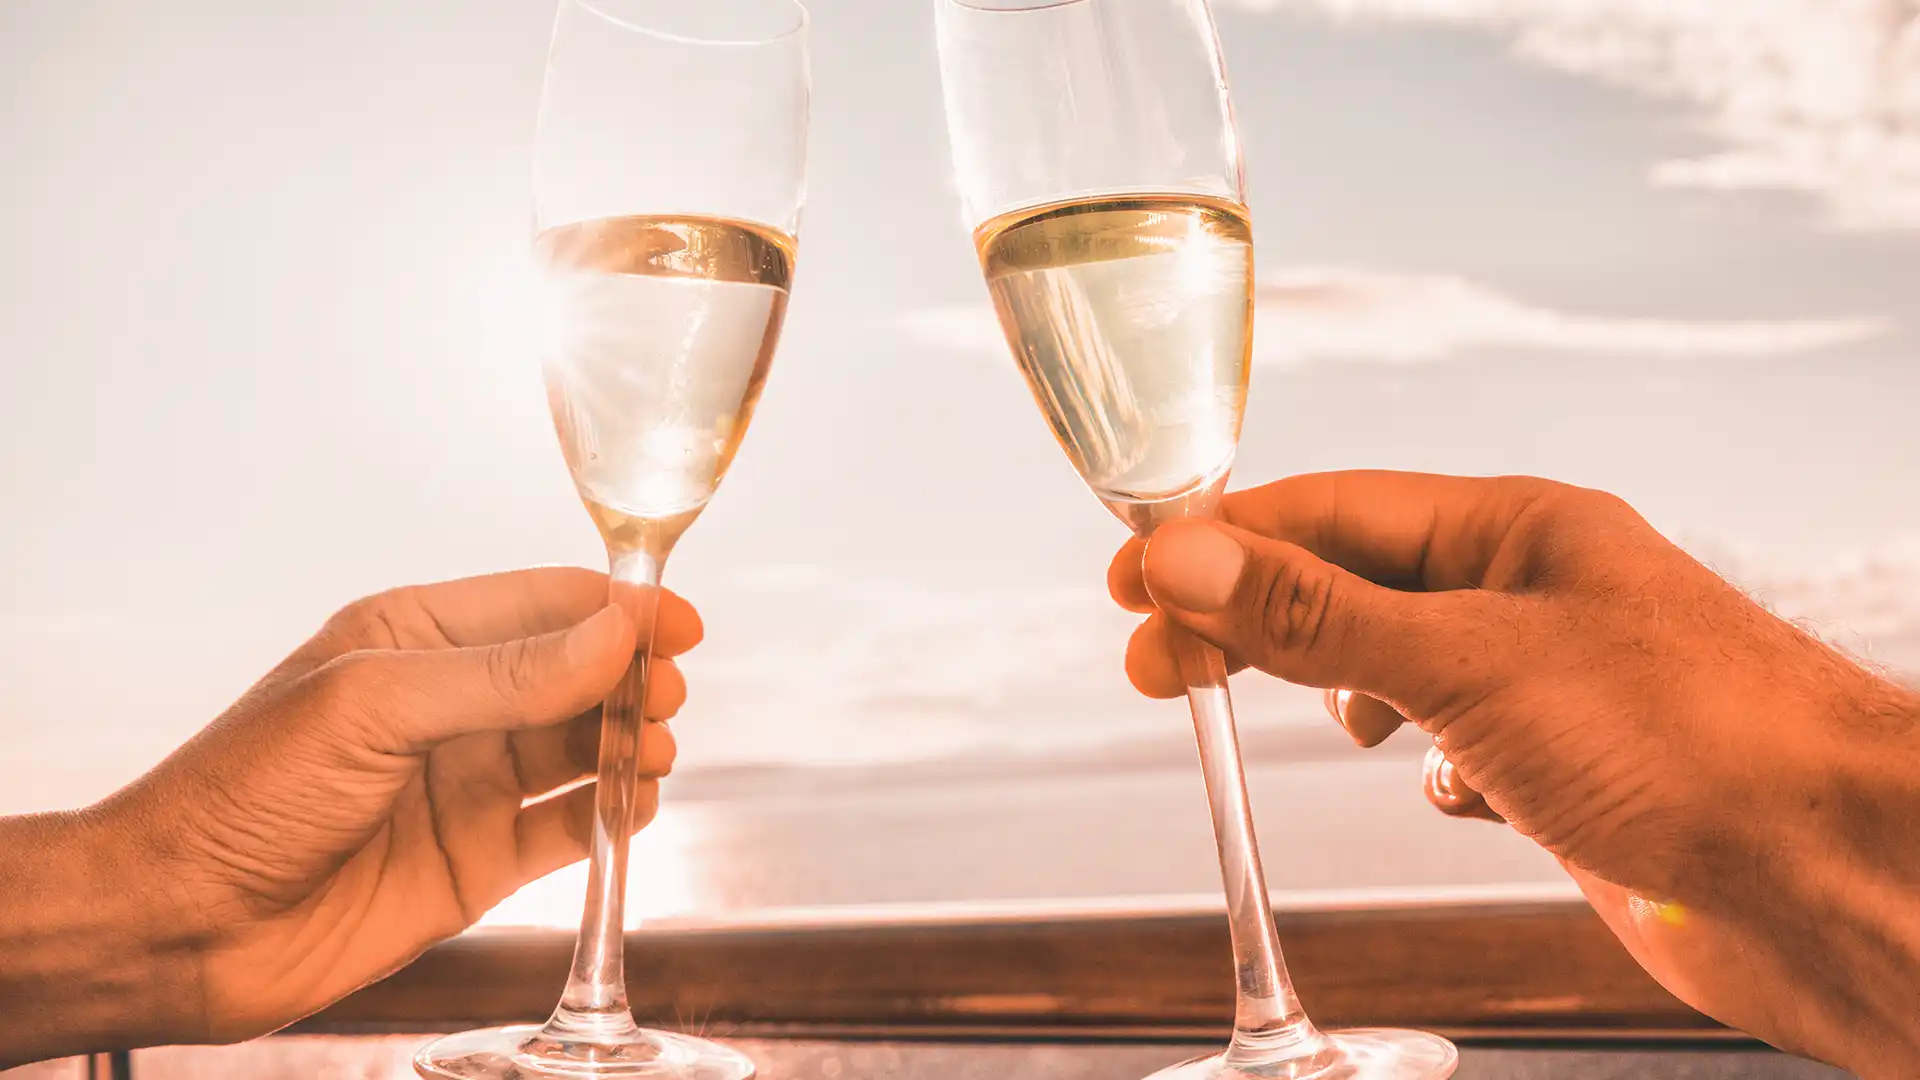 View of hands holding champagne glasses with ocean views and sunset in background.